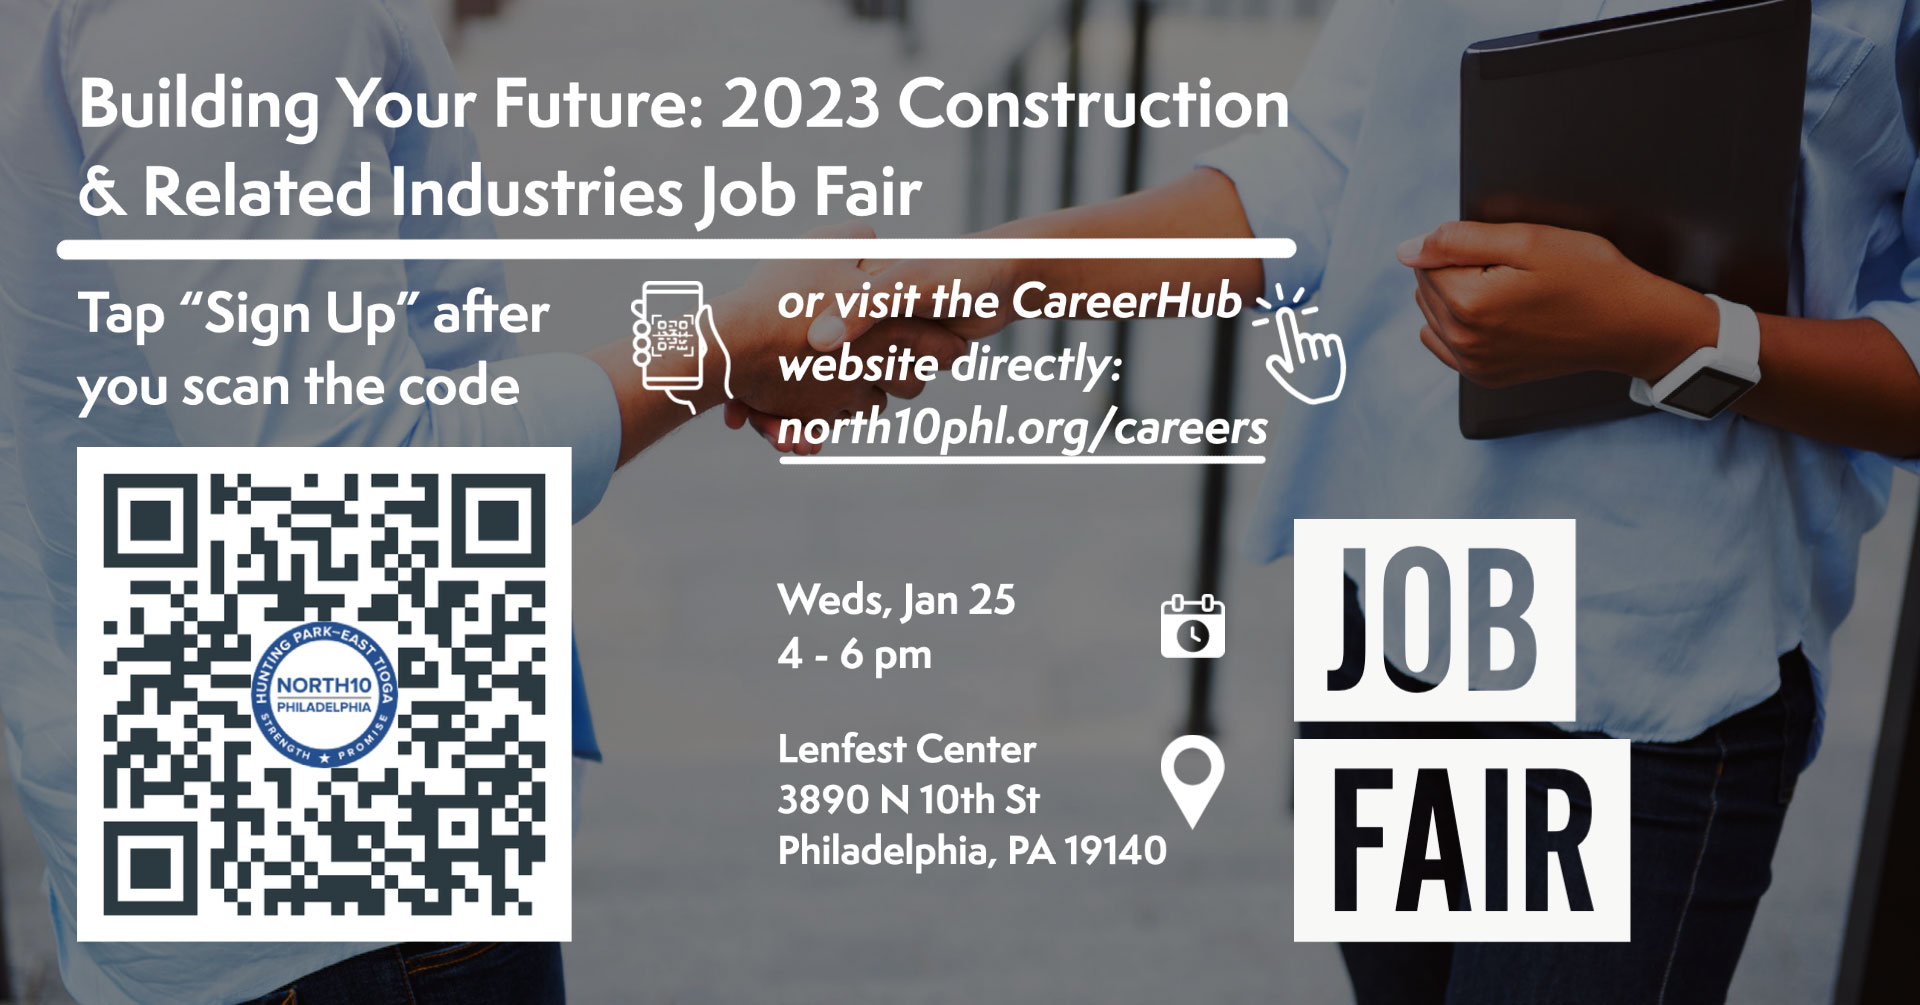 Building Your Future 2023 Construction & Related Industries Job Fair